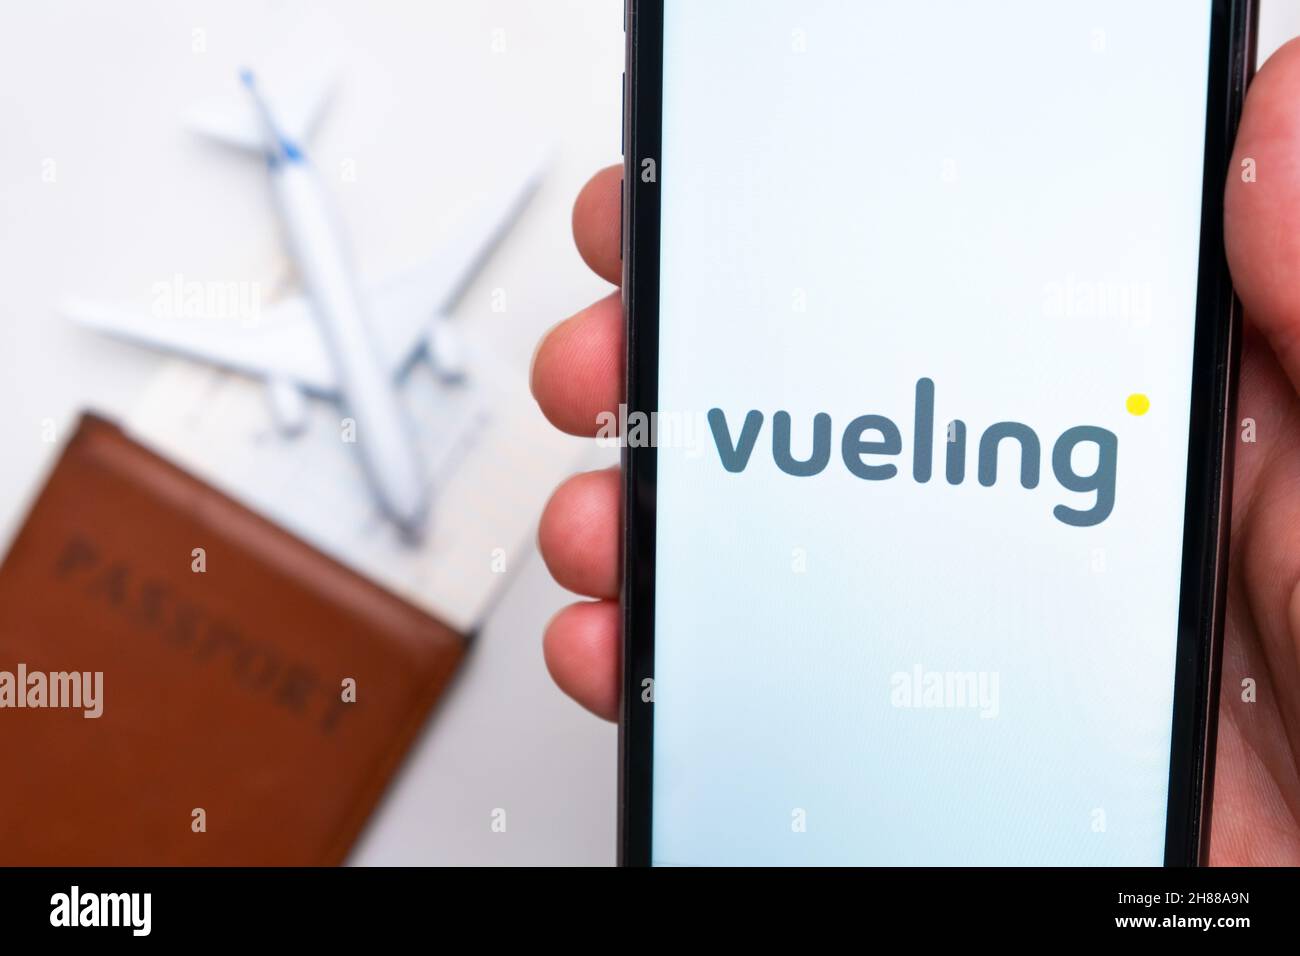 Vueling Airline app on a smartphone screen with a plane and passport on the background. The concept of travel app. November 2021, San Francisco, USA Stock Photo